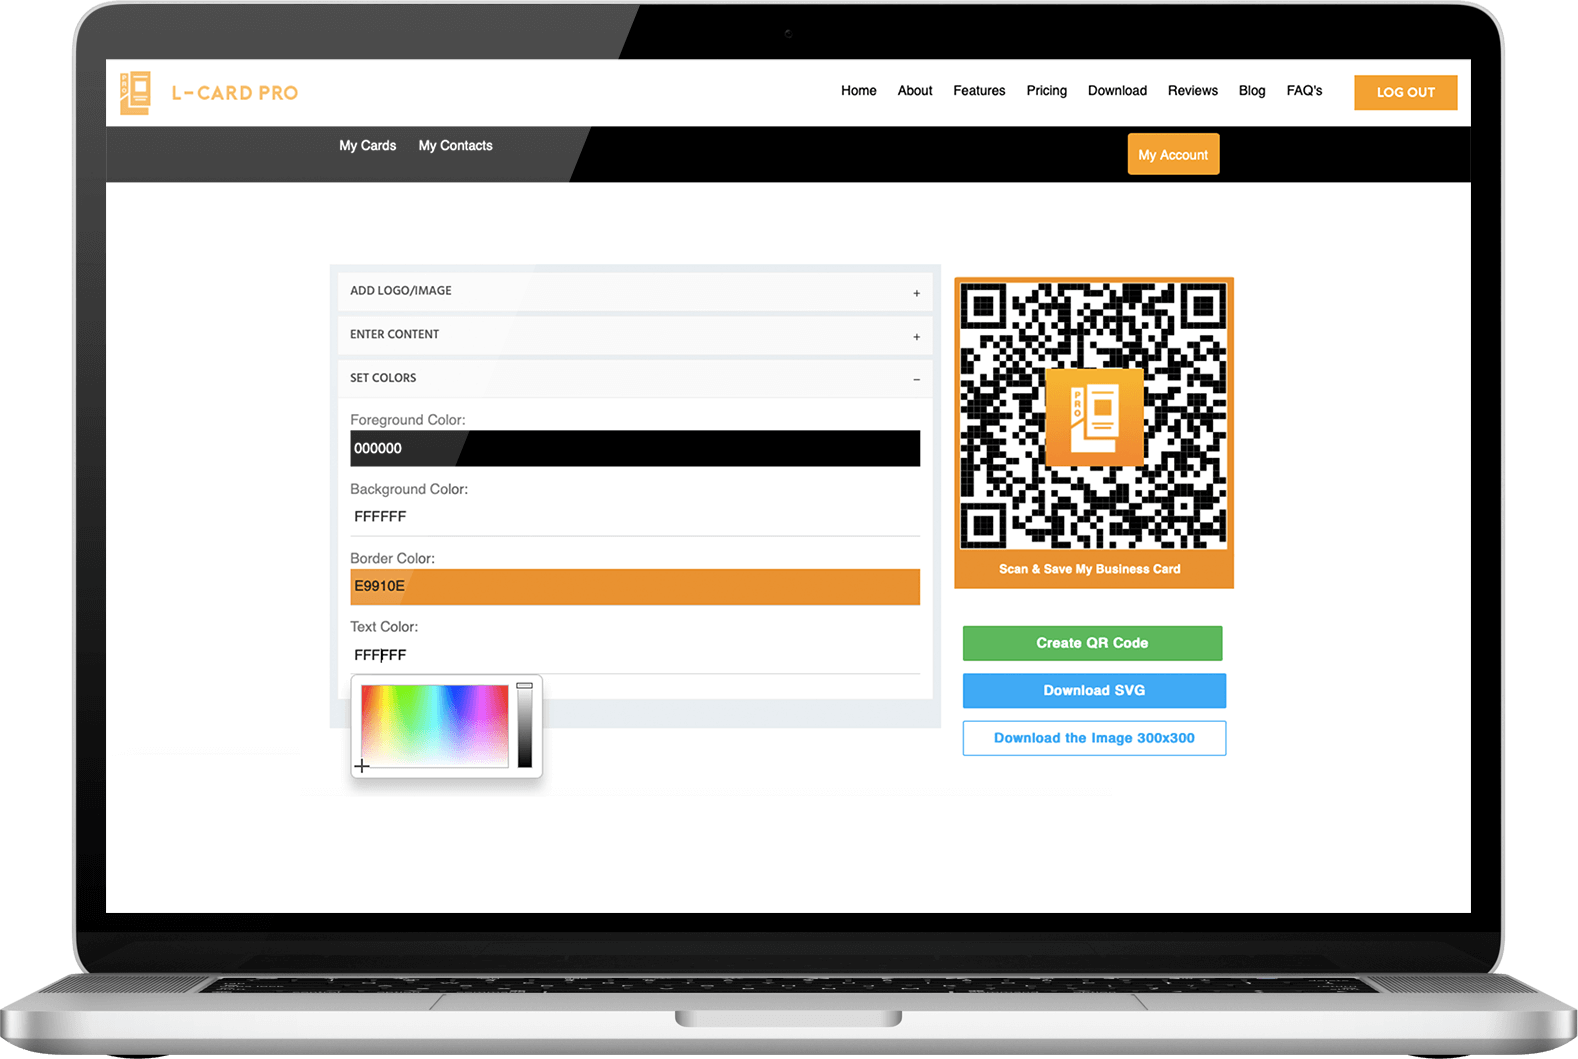 QR codes are now mainstream. And L-Card's custom QR codes provide all of the card details with a simple scan using a mobile device or other compatible apps. QR codes can then be displayed on banners, Zoom meetings, flyers, signage, and more.